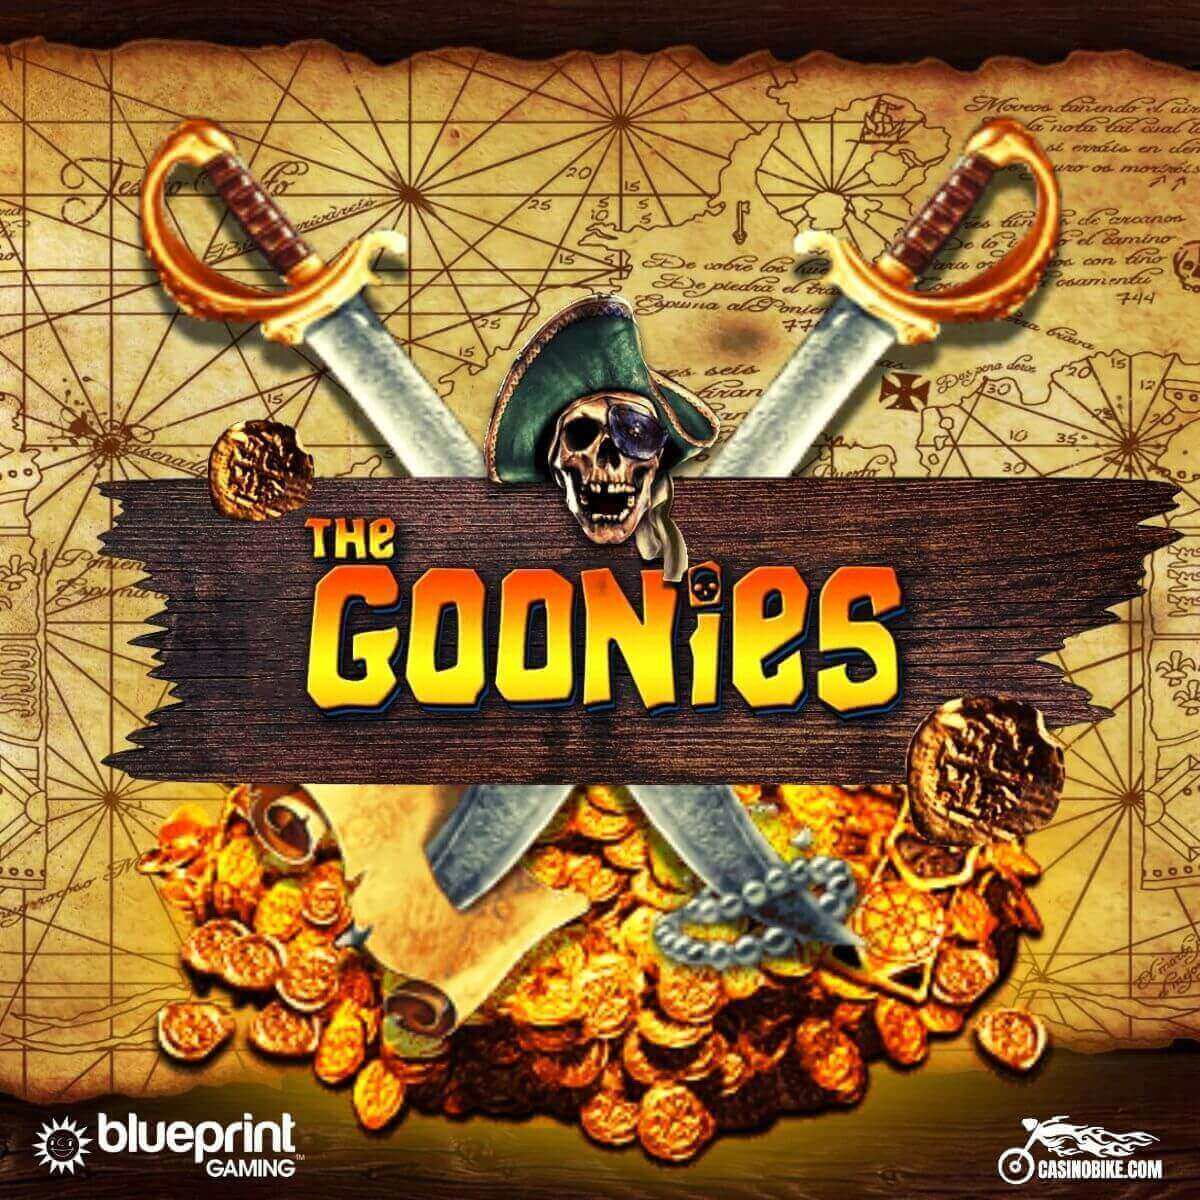 The Goonies Slot by Blueprint Gaming